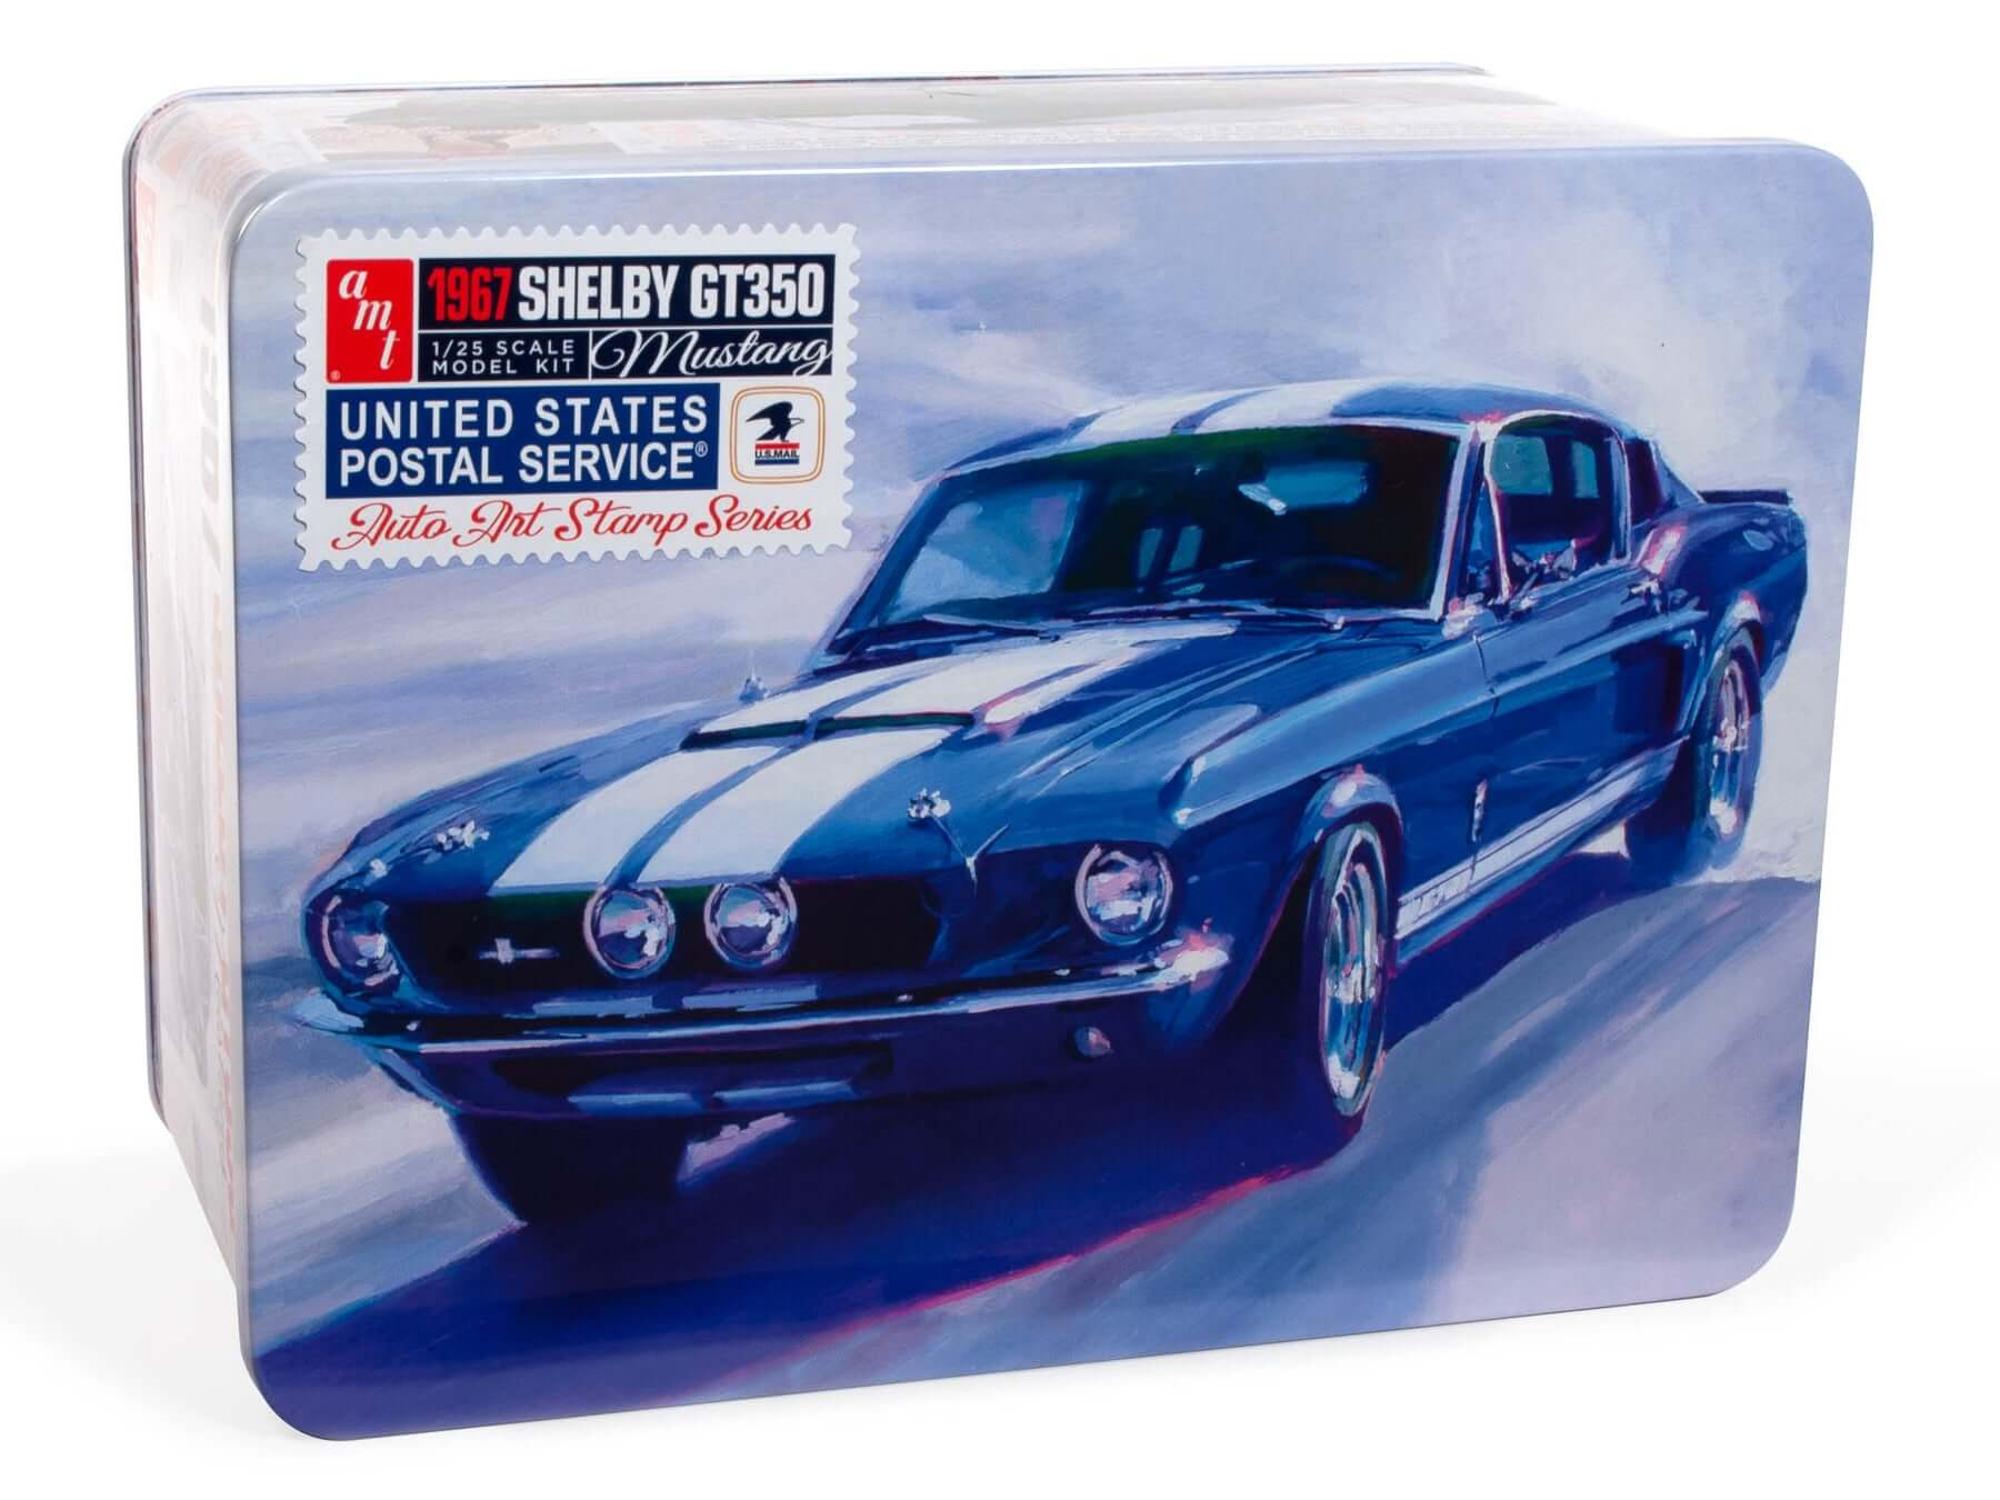 AMT 1/25 1967 Shelby GT-350 Model Kit (USPS Stamp Series Collector Kit)